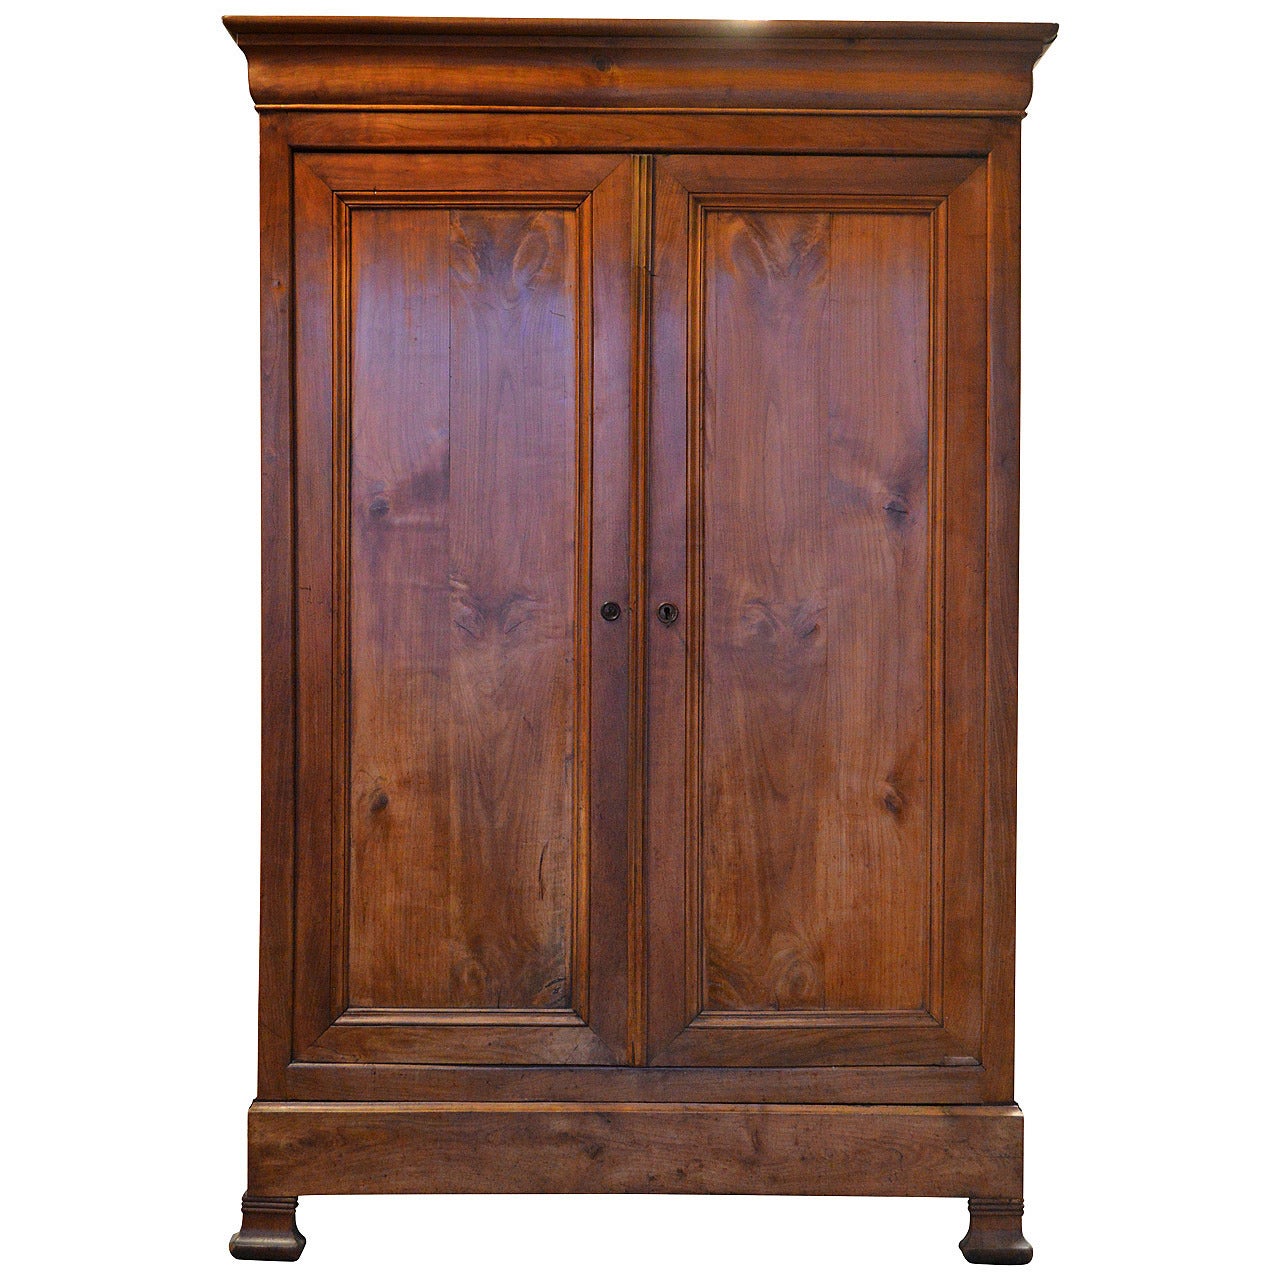 Louis Philippe Armoire in Cherry